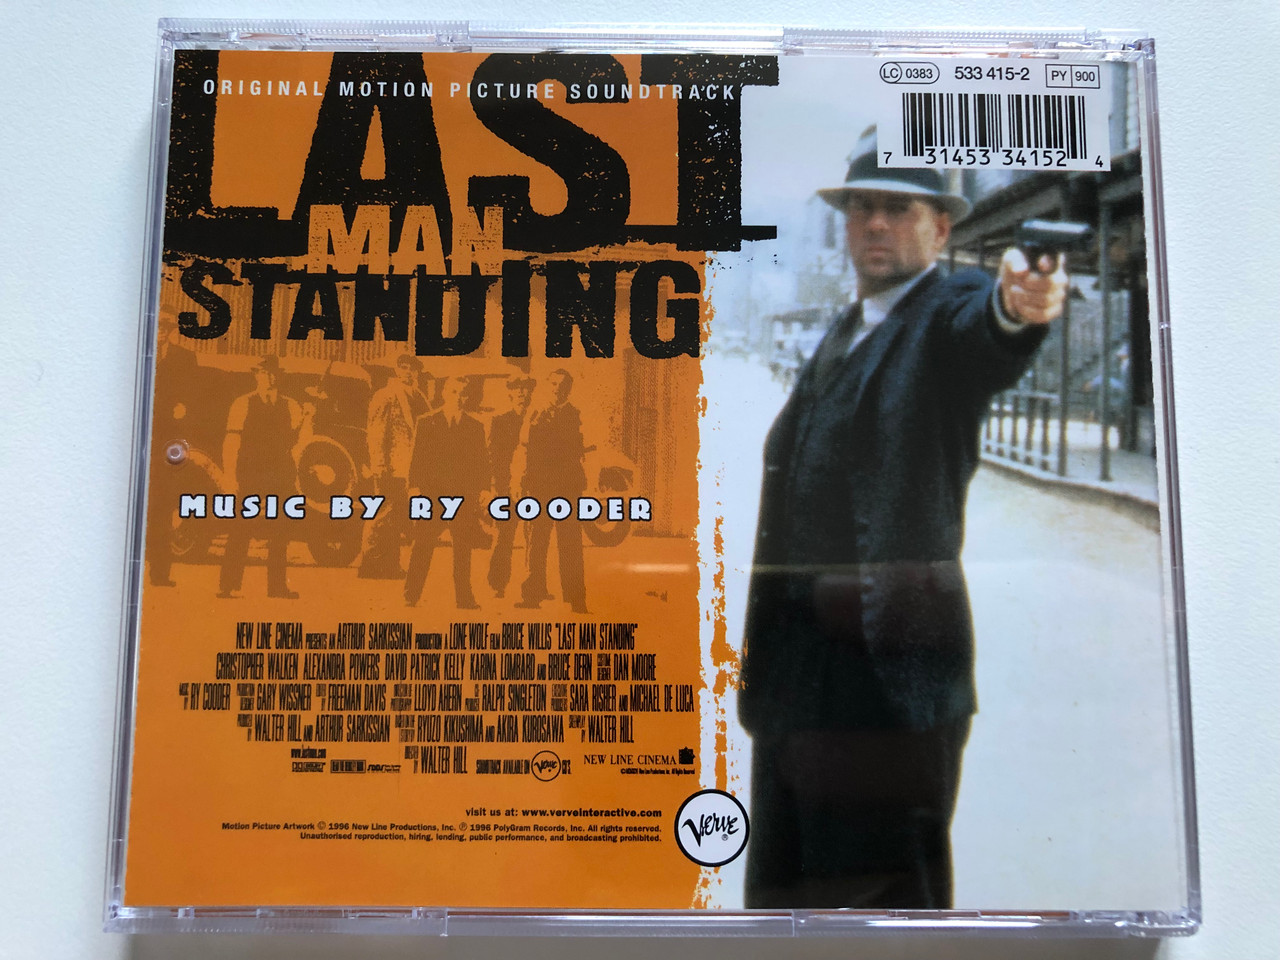 https://cdn10.bigcommerce.com/s-62bdpkt7pb/products/0/images/226431/Bruce_Willis_-_Last_Man_Standing_-_Music_By_Ry_Cooder_Original_Motion_Picture_Soundtrack_There_Are_Two_Sides_To_Every_War._And_John_Smith_Is_On_Both_Of_Them._Verve_Records_Audio_CD_1996_4__22828.1651570916.1280.1280.JPG?c=2&_gl=1*1ryffsj*_ga*MjA2NTIxMjE2MC4xNTkwNTEyNTMy*_ga_WS2VZYPC6G*MTY1MTU1ODAzOC4zODAuMS4xNjUxNTcwNzA0LjM3